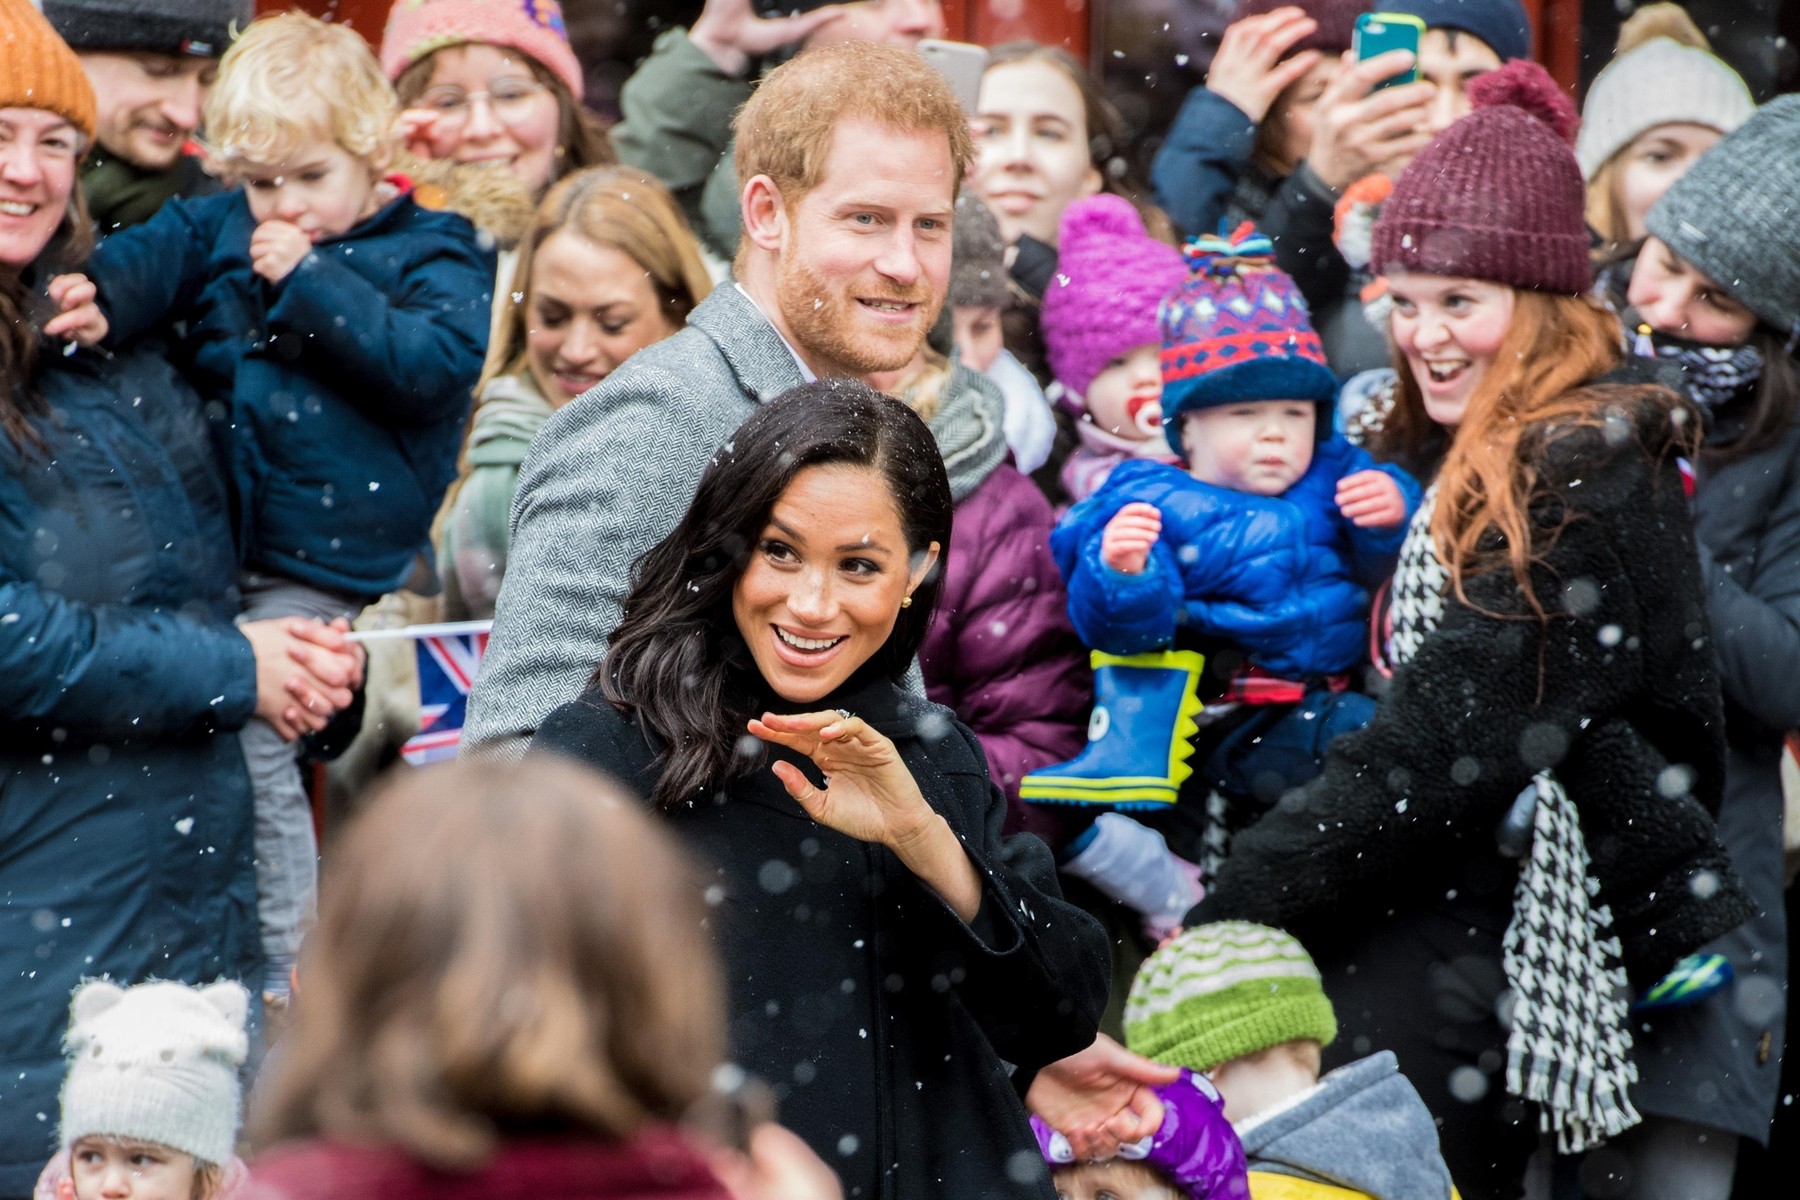 London, UK  - The Prince Harry office has confirmed that he and his family will be spending 